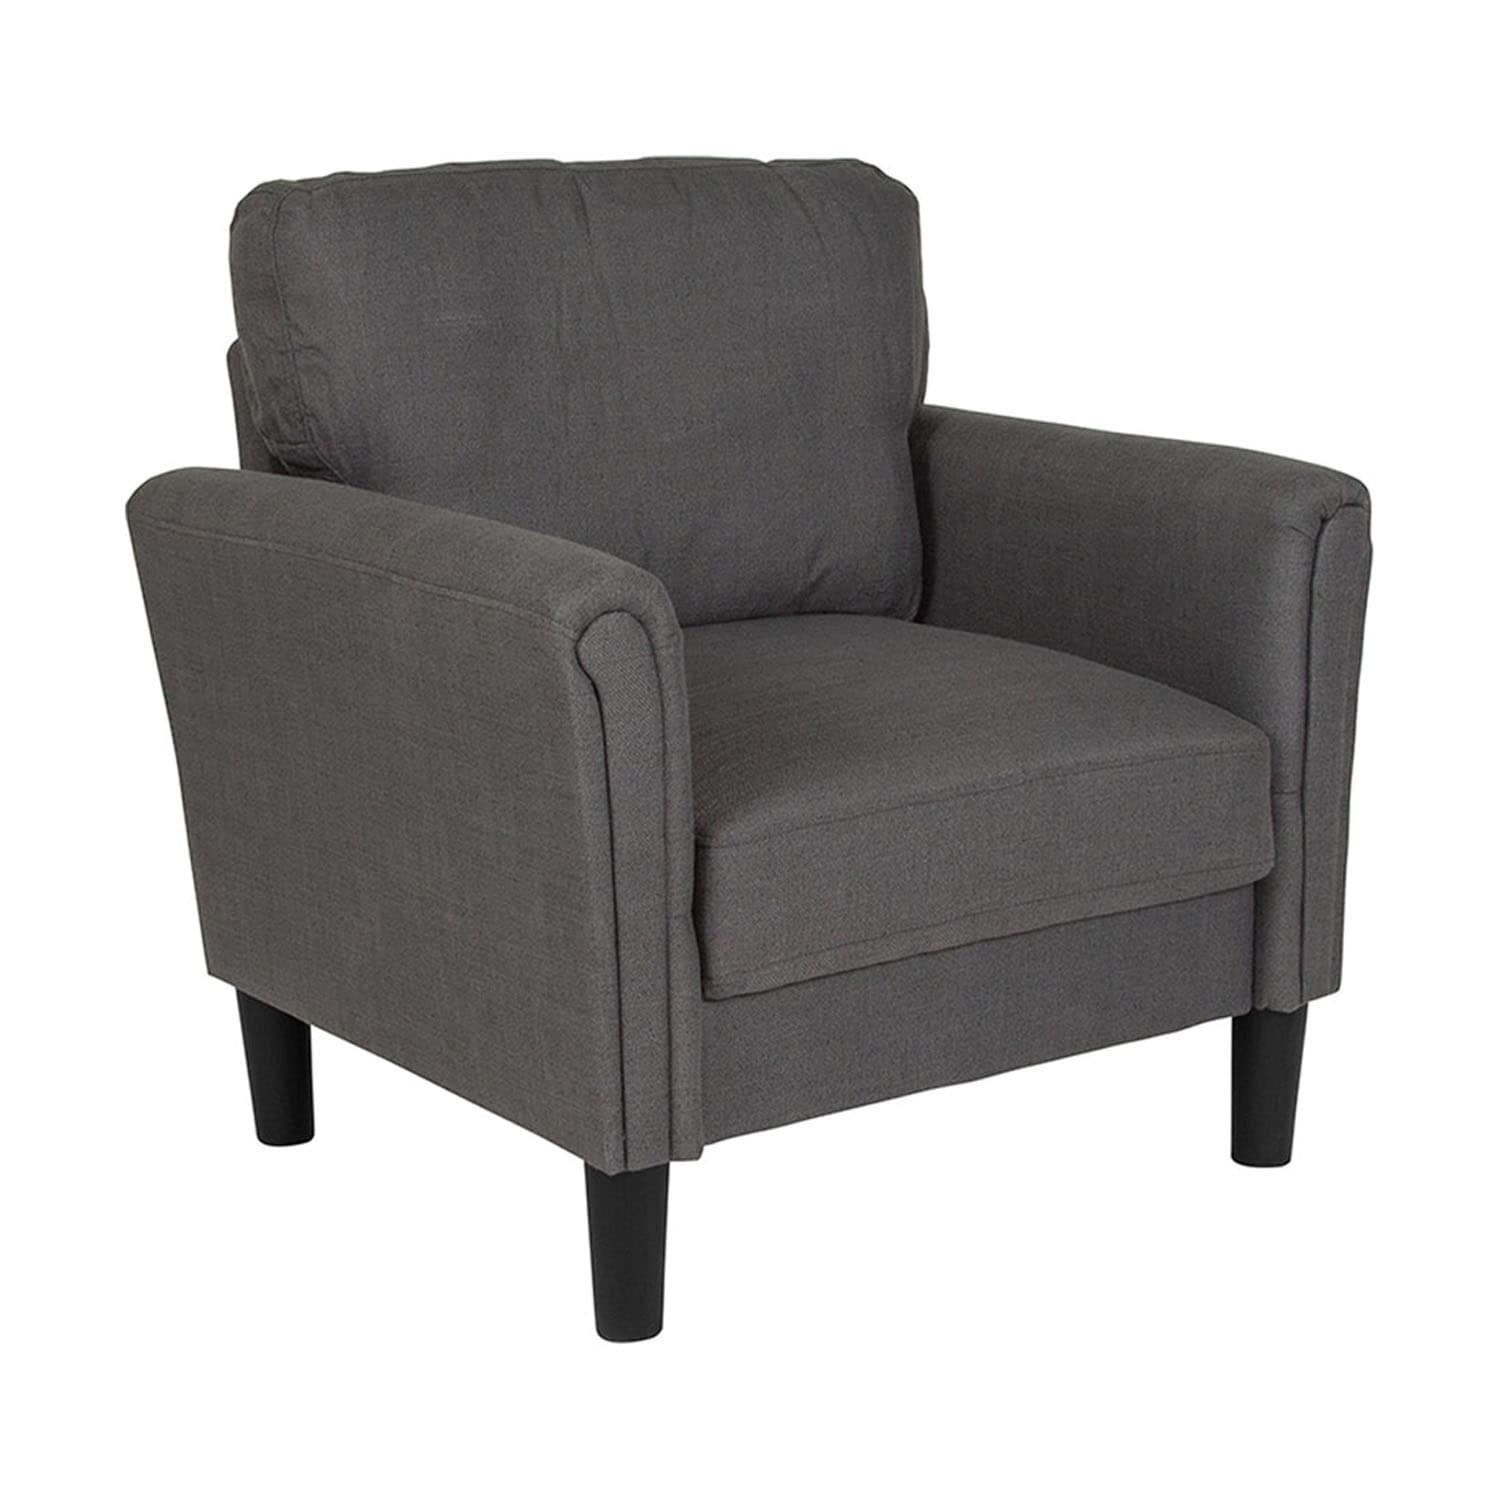 Shop Offex Contemporary Upholstered Chair With Oversized Back